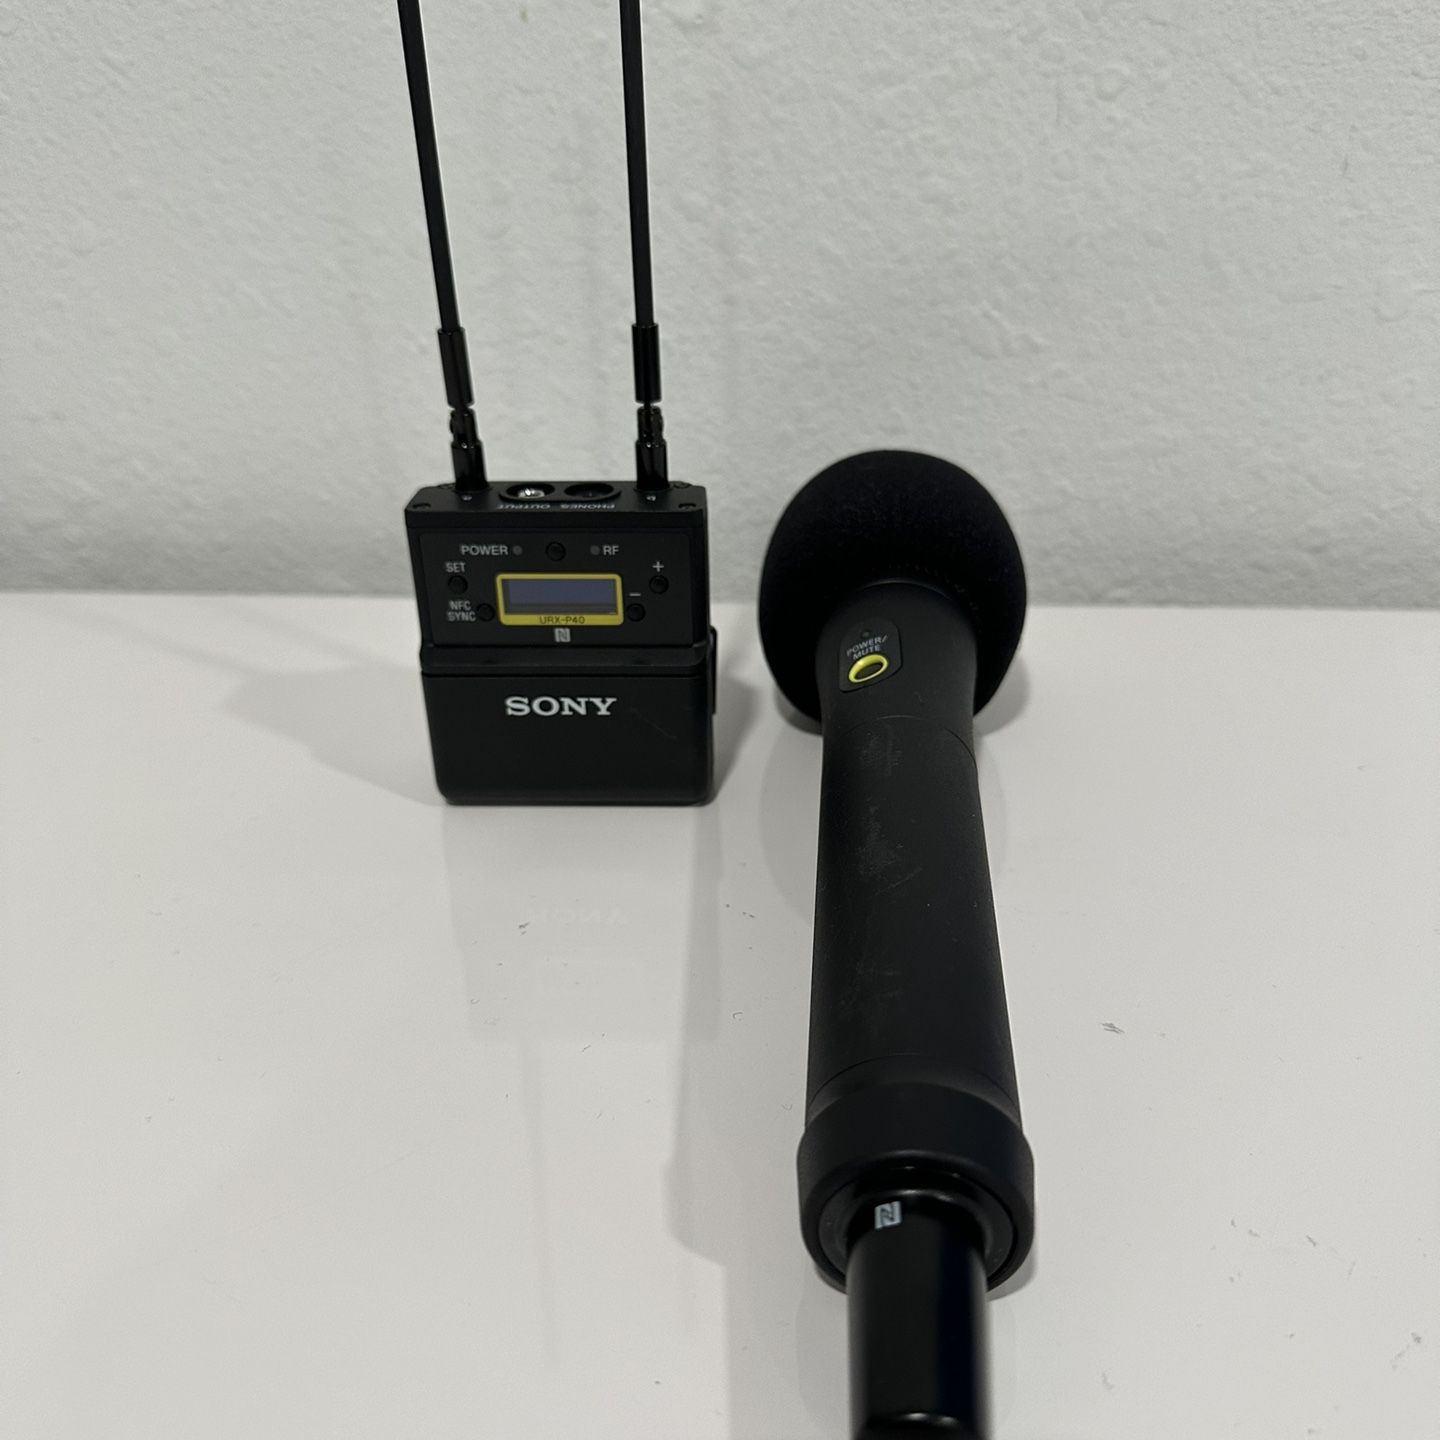 Sony UWP-D22 Handheld Microphone System